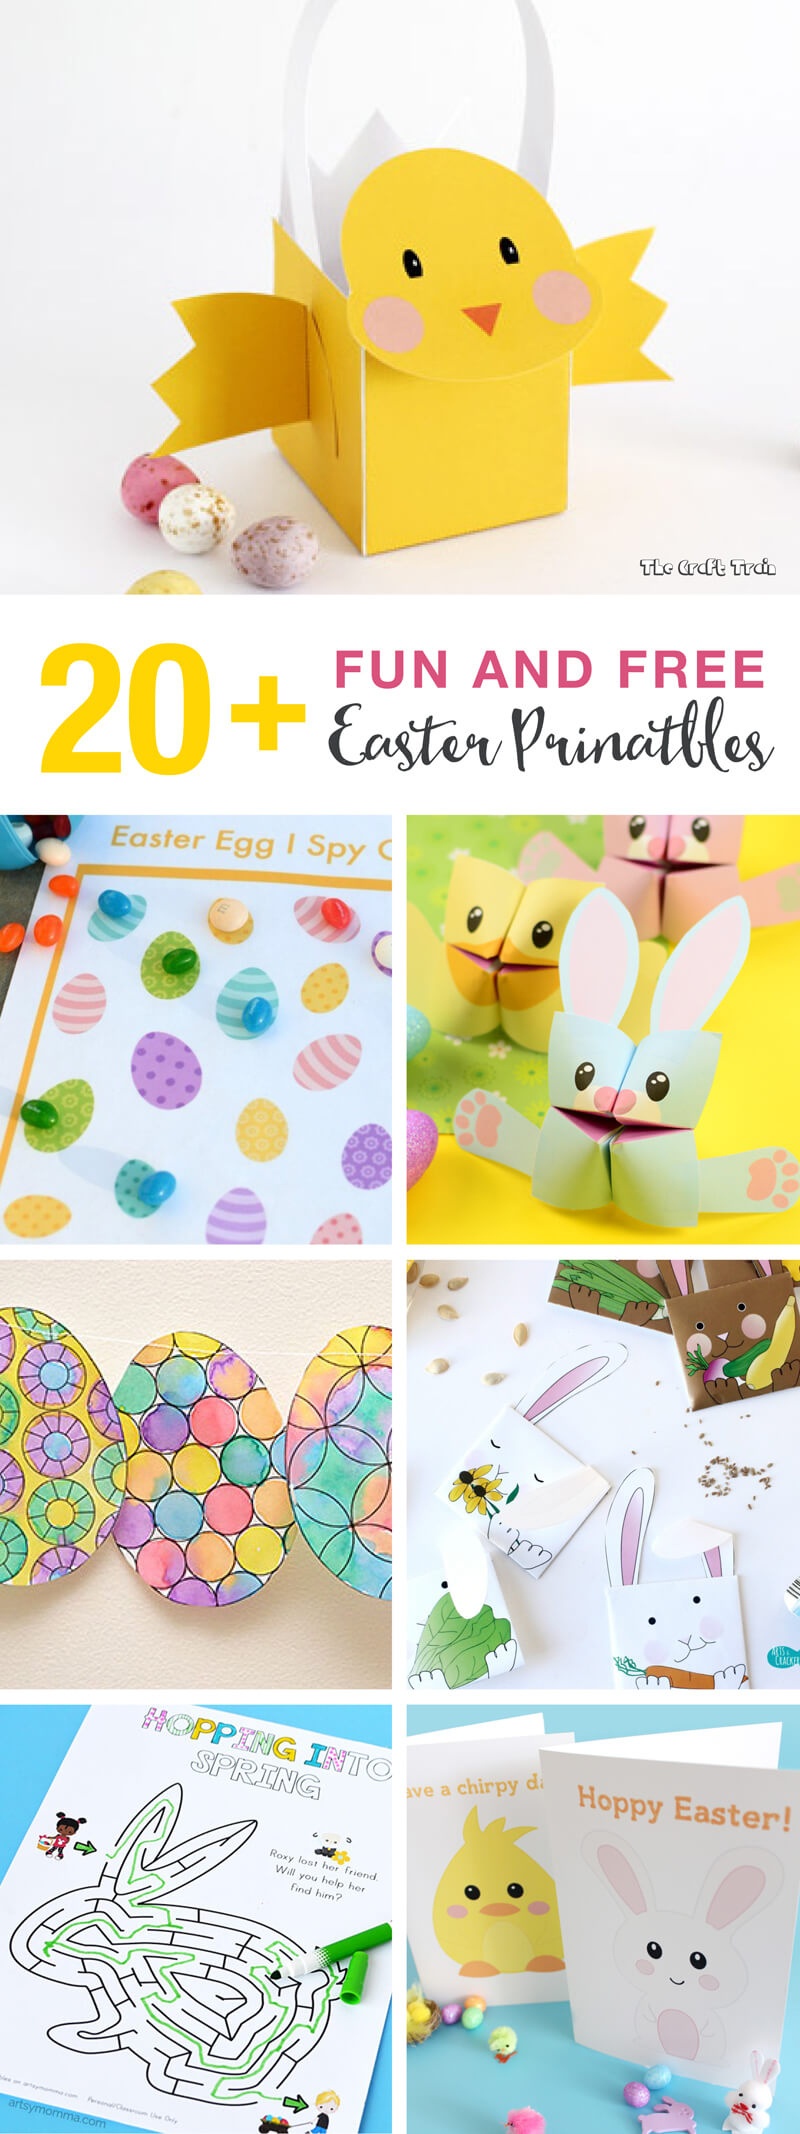 20+ Fun And Free Easter Printables For Kids | The Craft Train - Free Printable Craft Activities